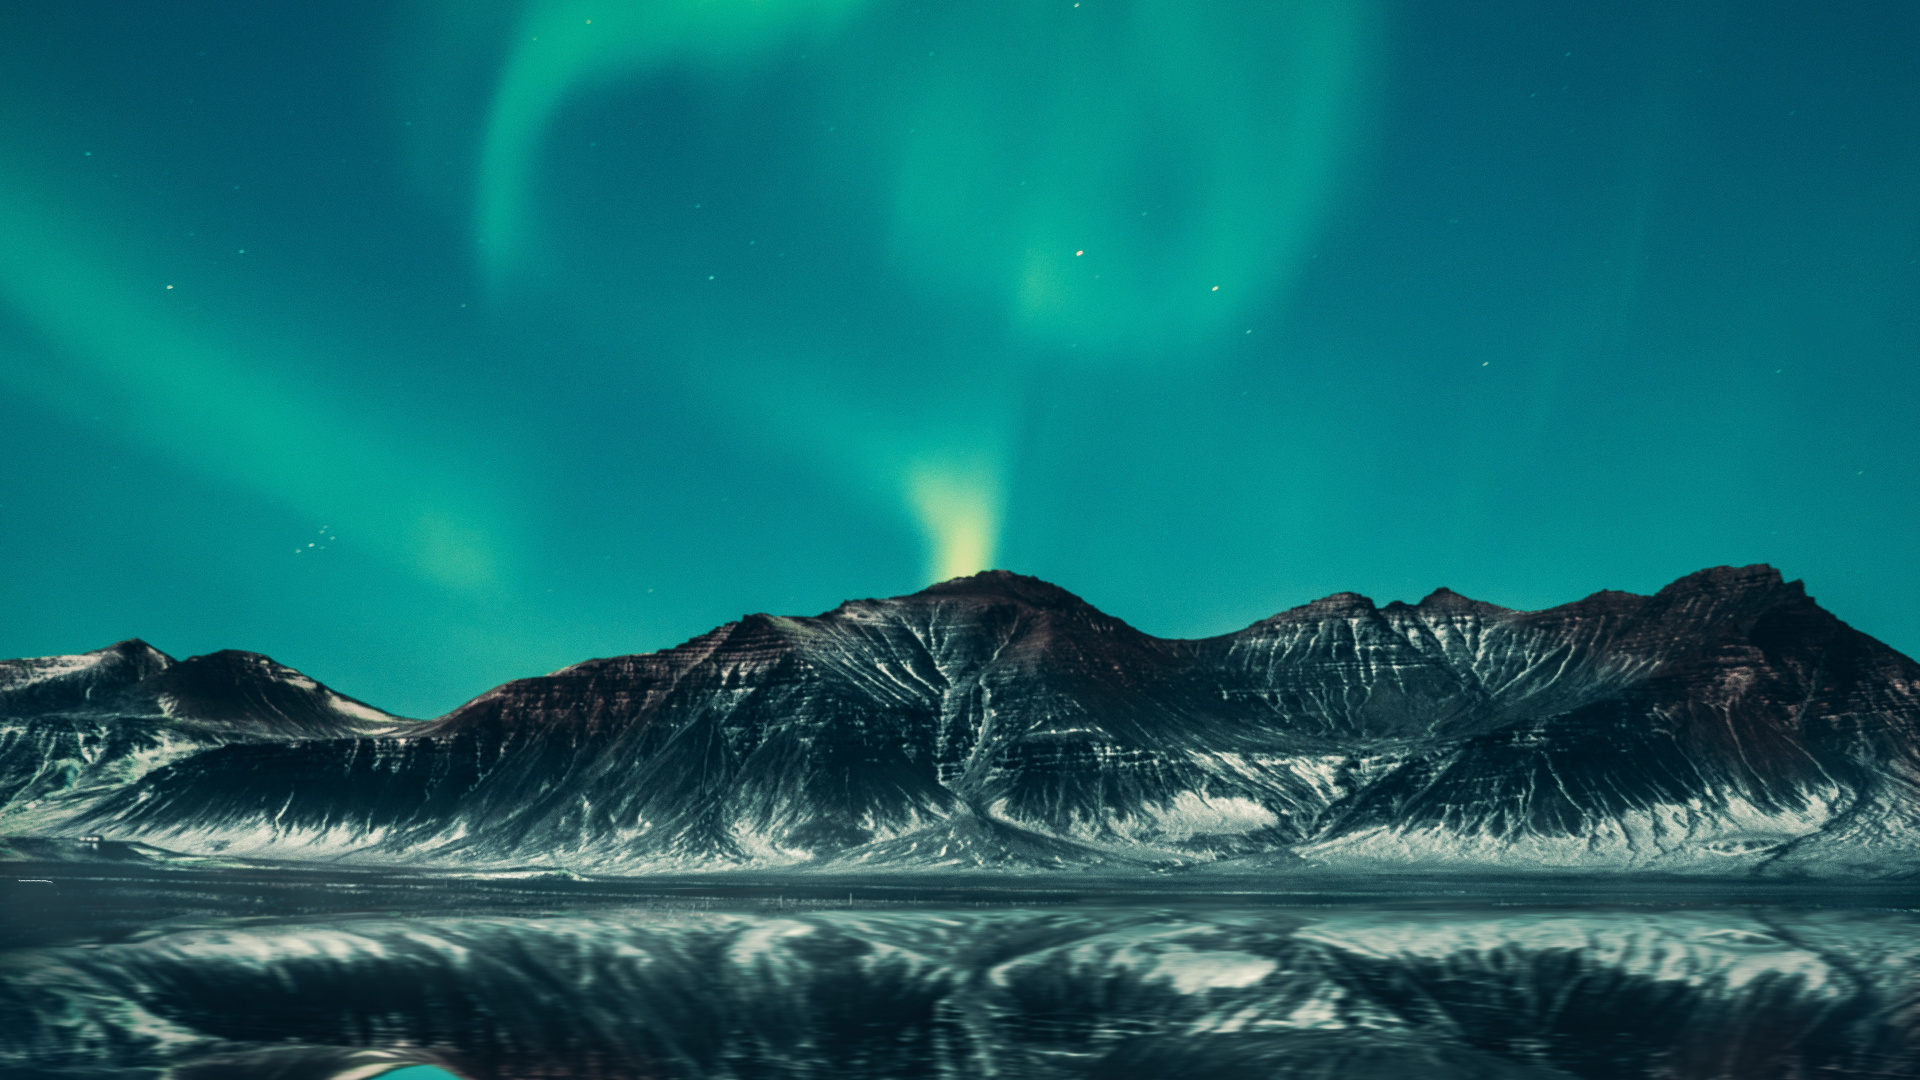 Northern Lights Poster, Aurora, Earth, Poster, Northern Lights Viewing. Wallpaper in 1920x1080 Resolution